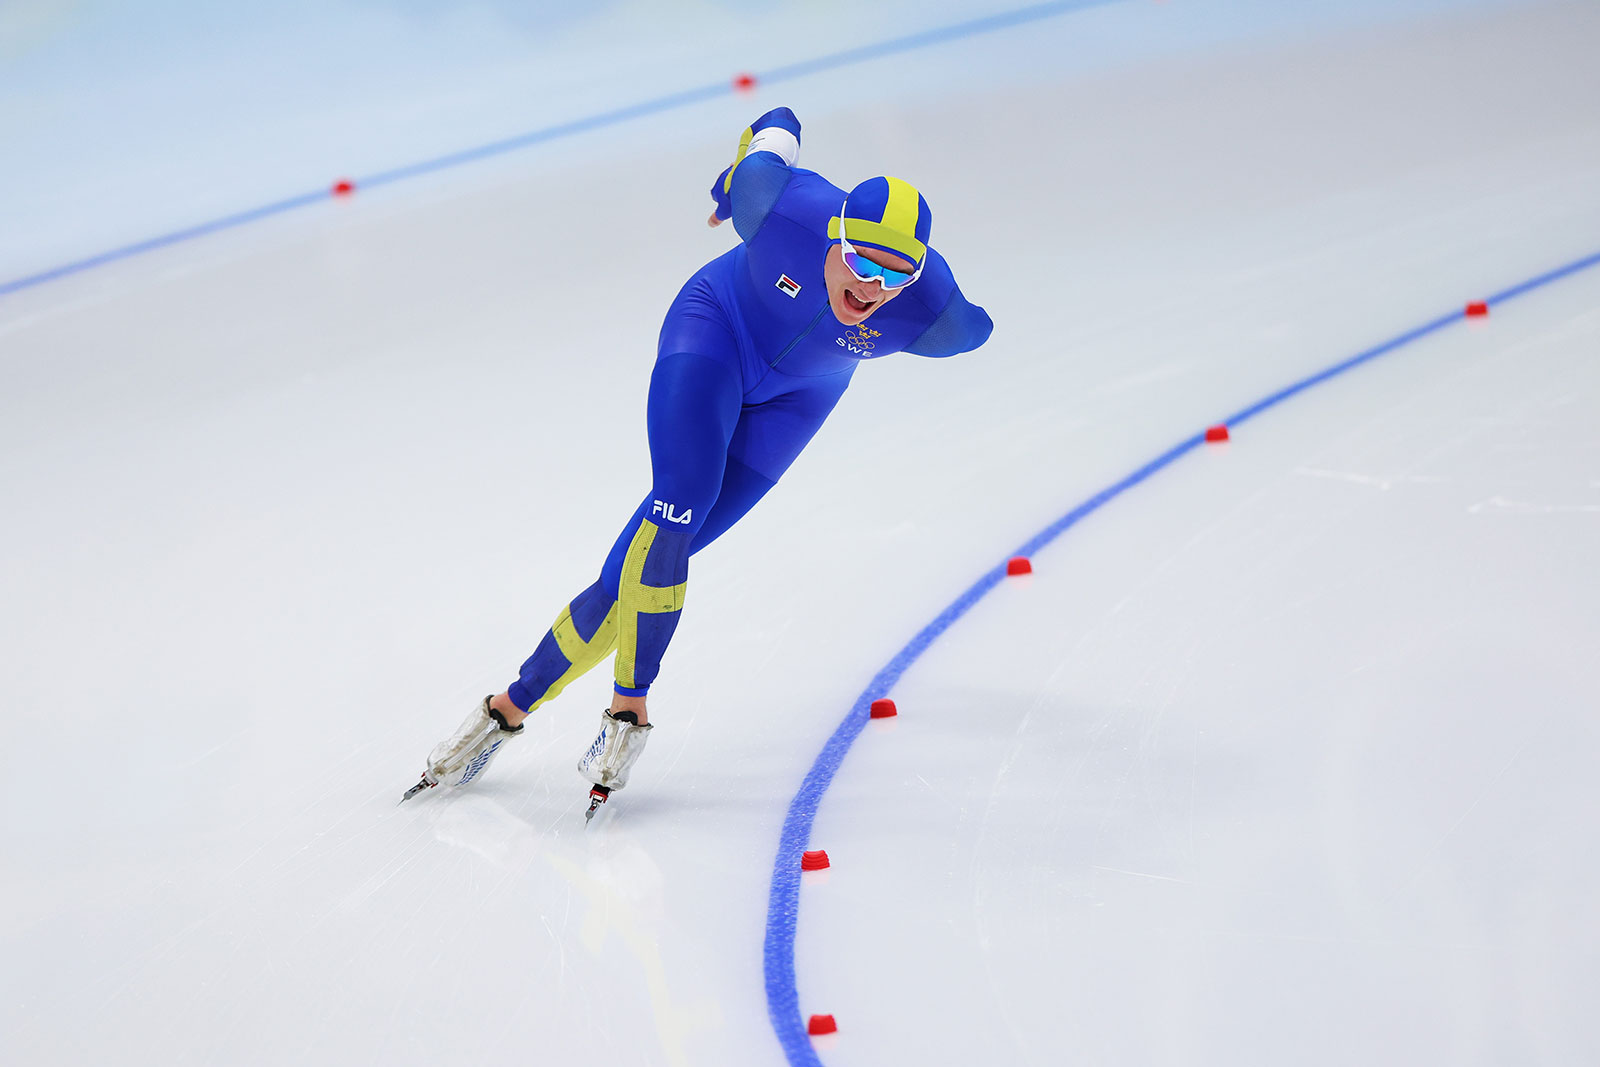 Sweden's Nils van der Poel skates on the way to a new world record during the men's 10,000m speed skating event on February 11.